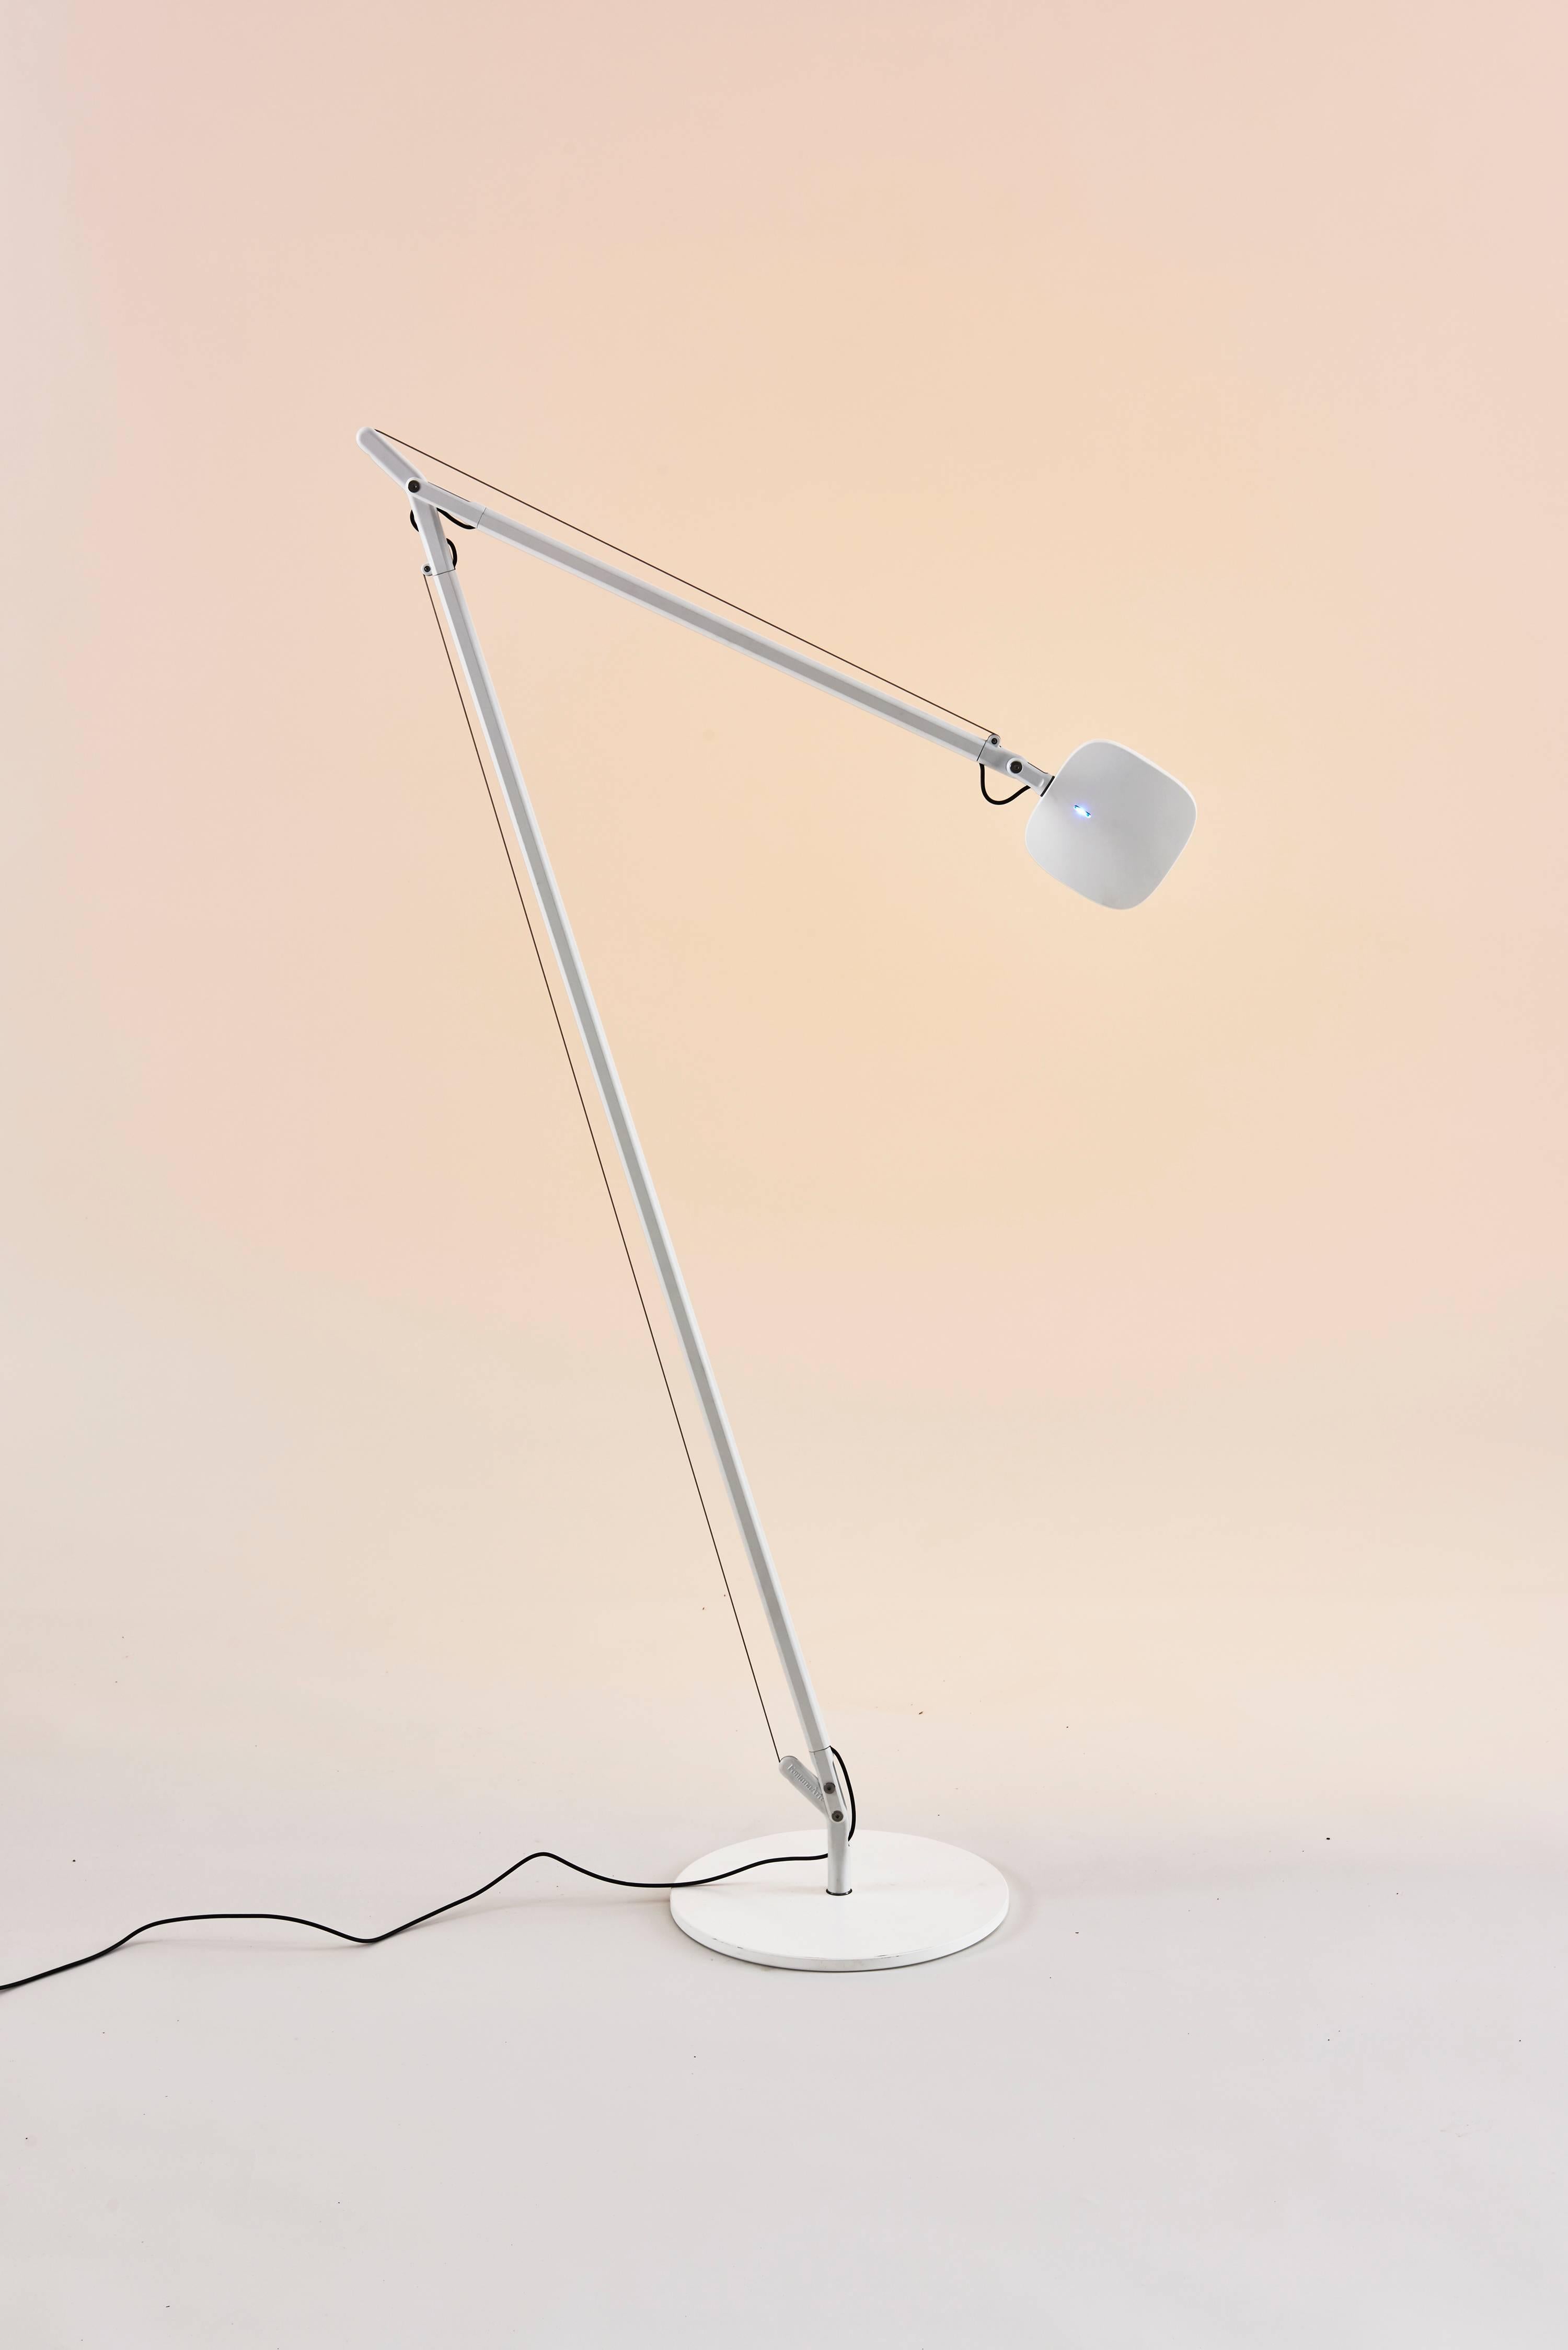 Demi-Volee Floor Lamp by Odo Fioravanti for Fontana Arte In New Condition For Sale In Brooklyn, NY